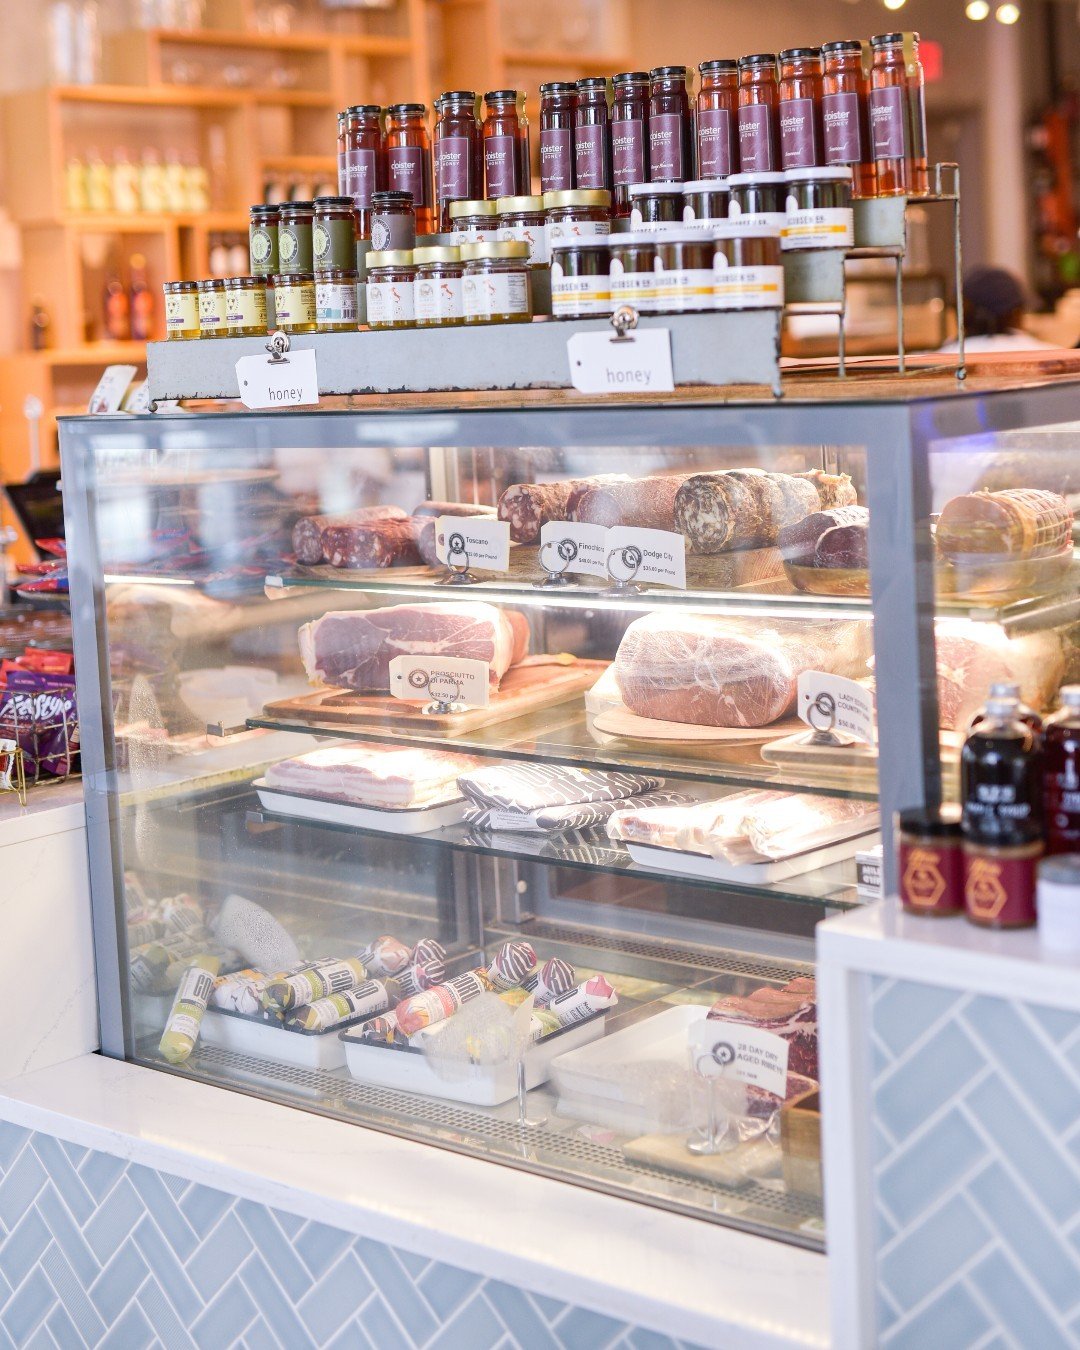 Pick up artisanal charcuterie and house aged meats at Star Provisions&rsquo; Meat &amp; Seafood counter! We prepare terrines, fresh sausage pate, and receive fresh seafood daily.